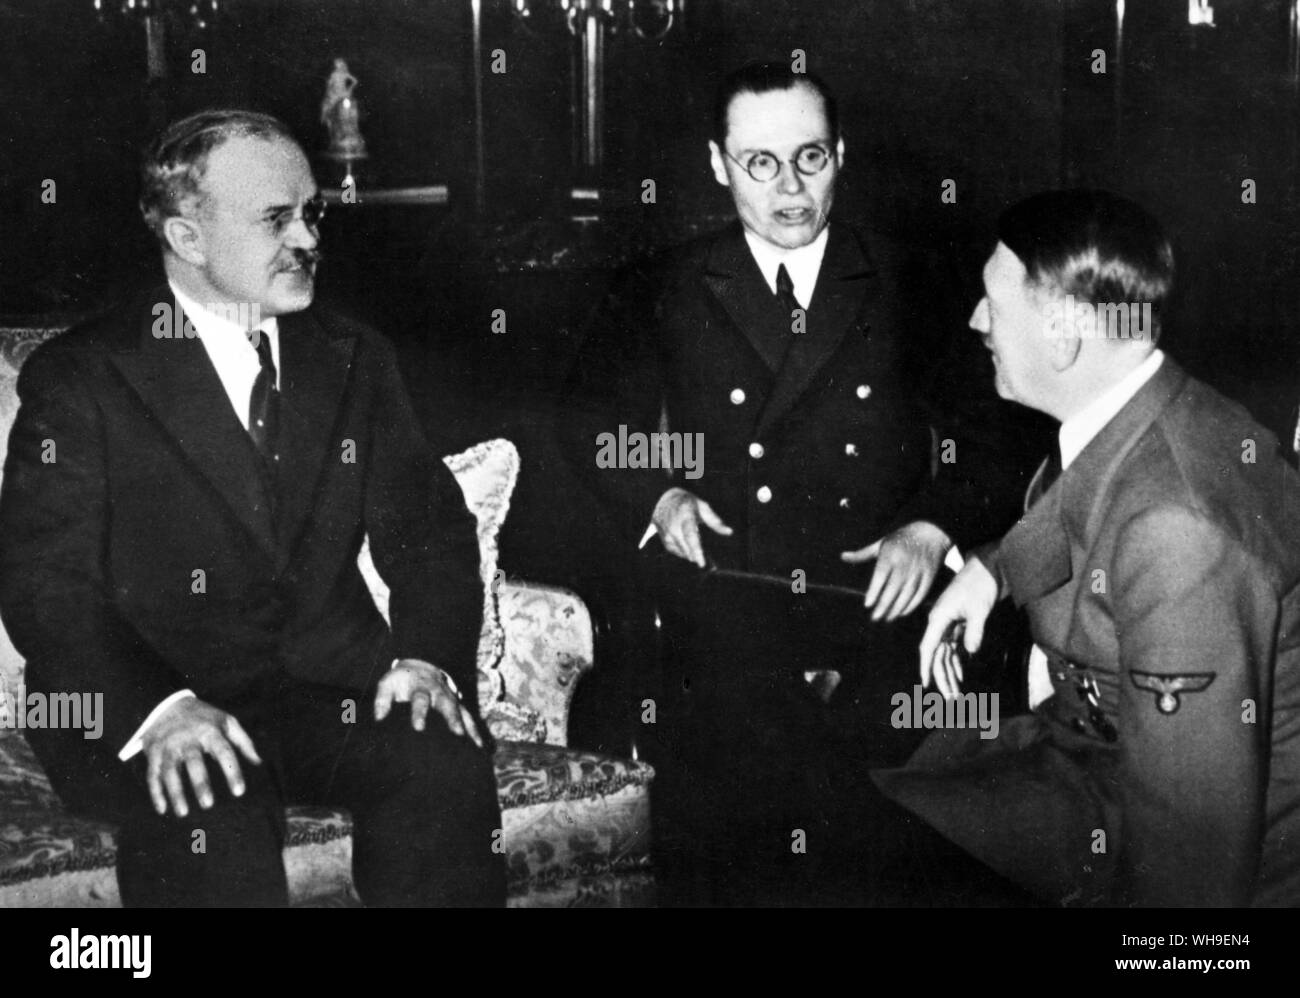 Molotov and Adolf Hitler (1889-1945) discuss Russian-German relations in light of friendship pact. Stock Photo